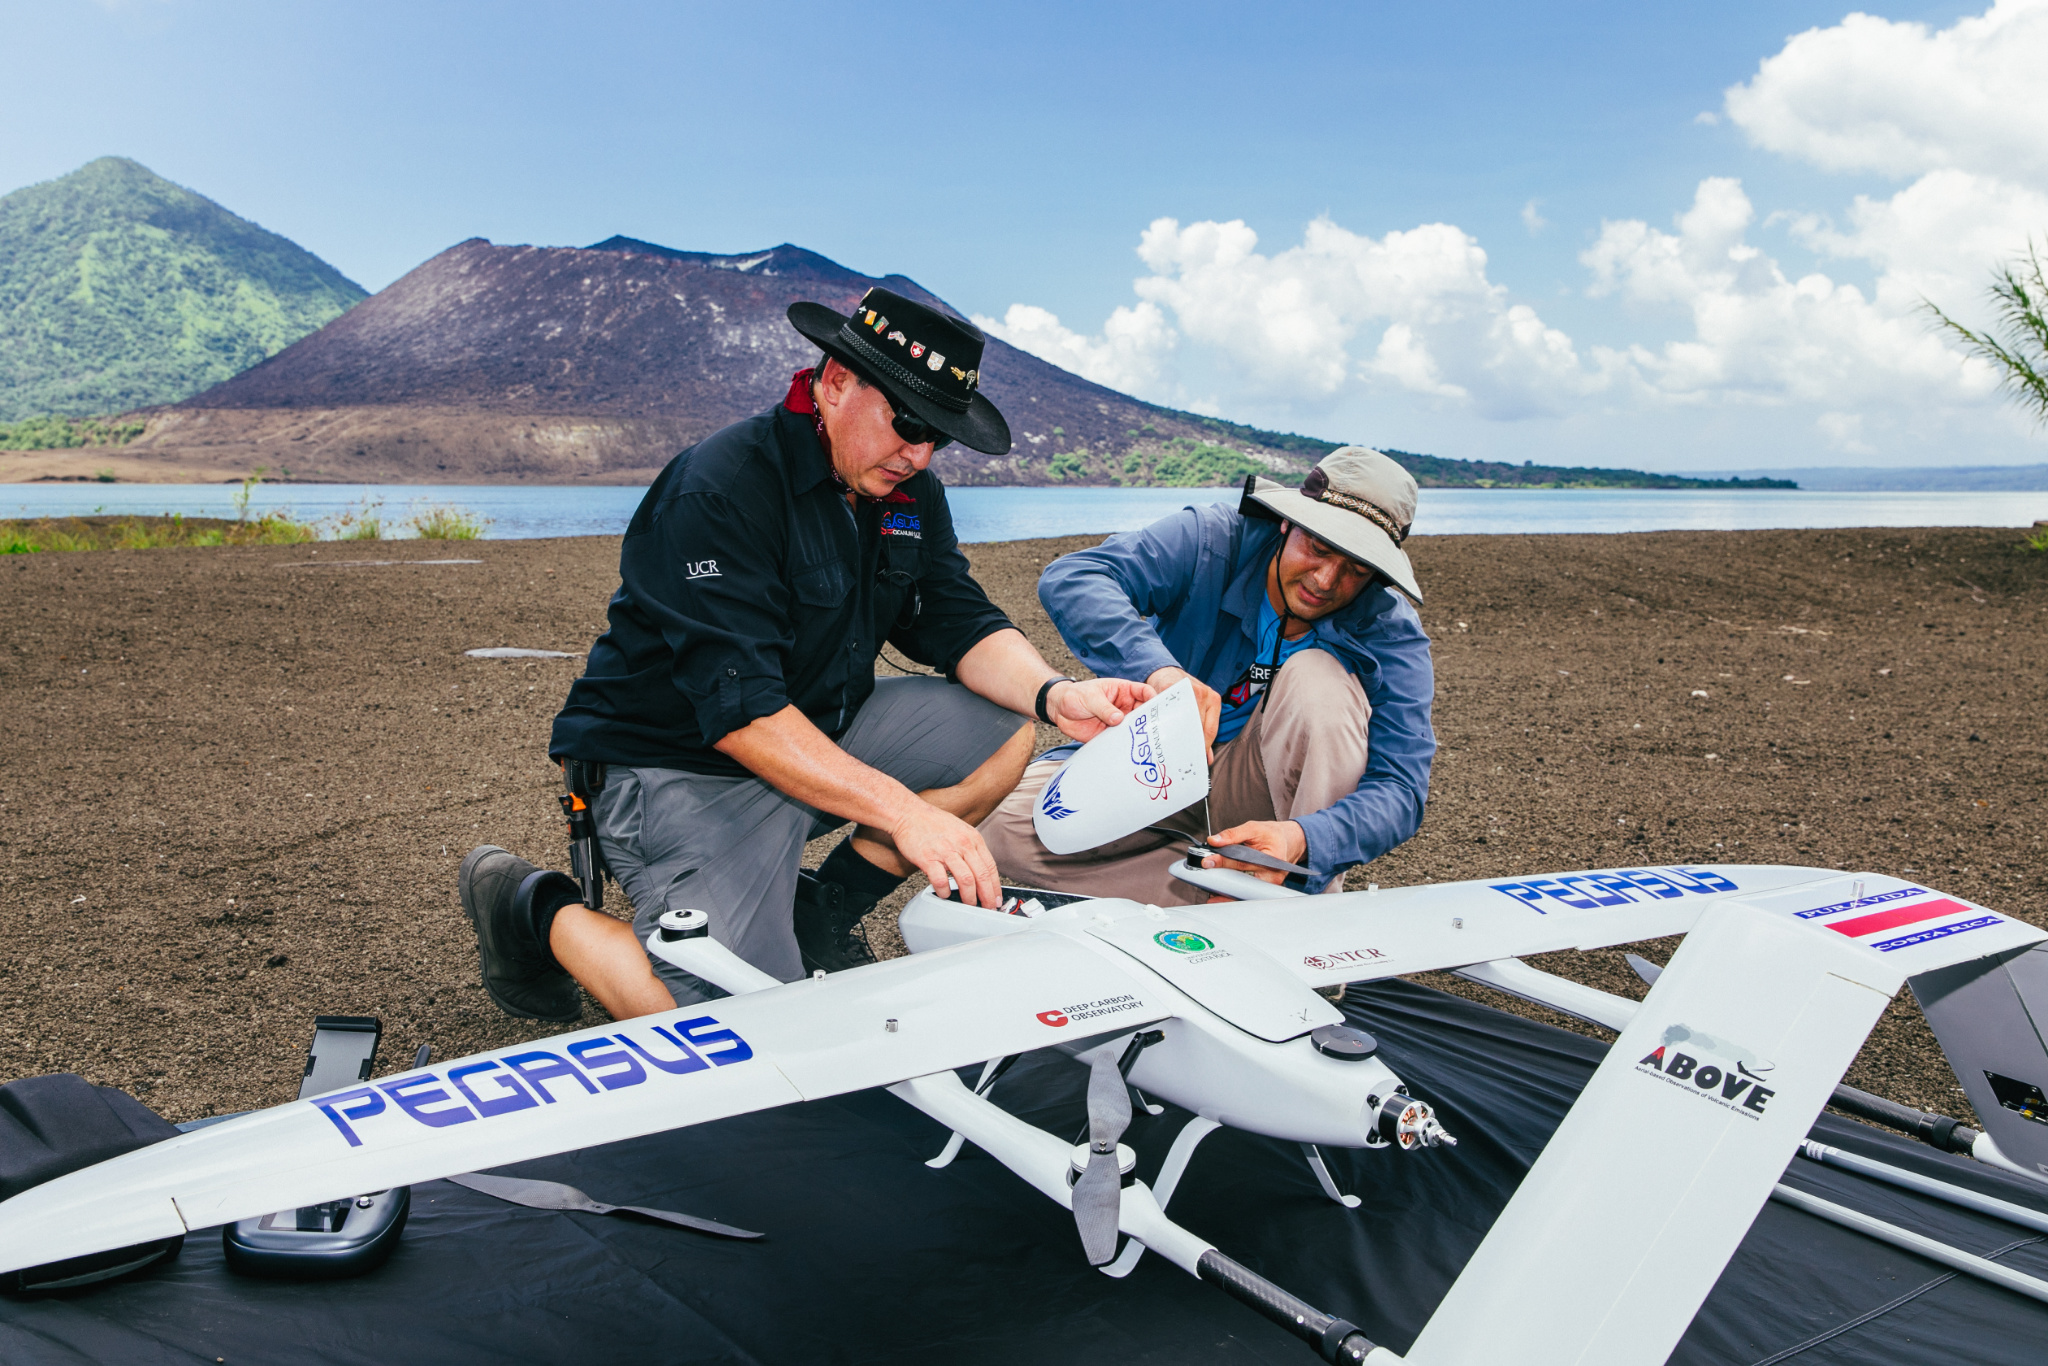 Drone used to measure volcanic gases